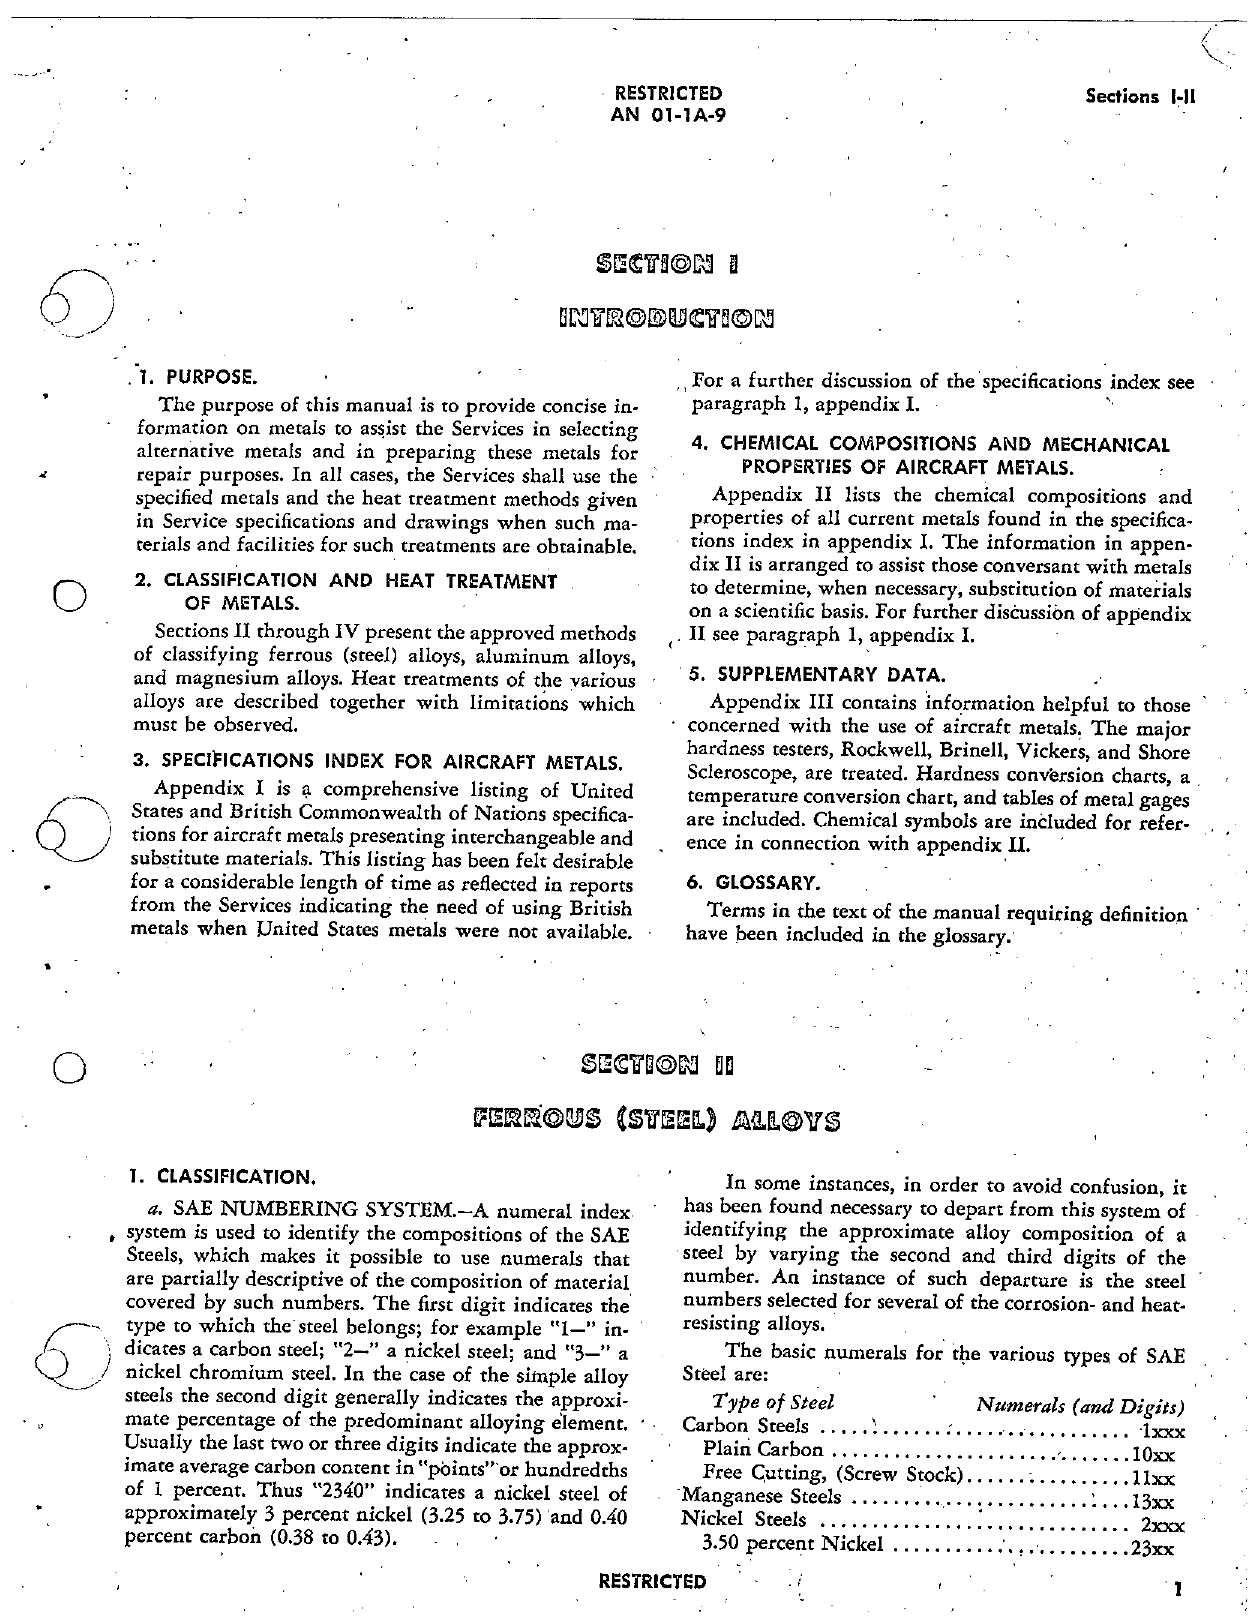 Sample page 5 from AirCorps Library document: United States and British Commonwealth of Nations Aircraft Metals